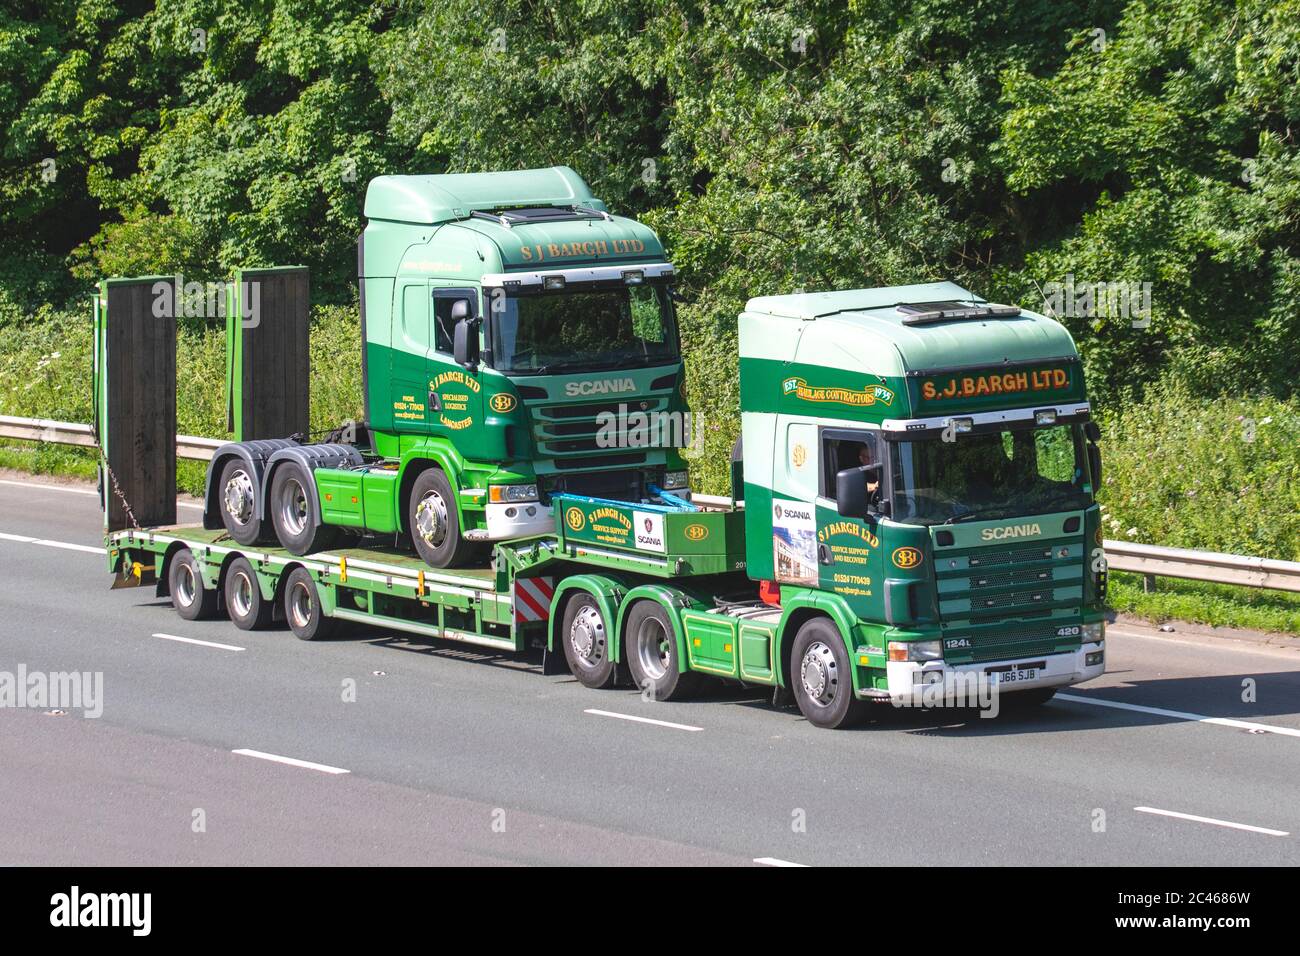 S J Bargh Ltd Haulage Delivery Trucks Lorry Transportation Truck Vehicle Carrier Trailer Scania Vehicle European Commercial Transport Industry Hgv M6 At Manchester Uk Stock Photo Alamy